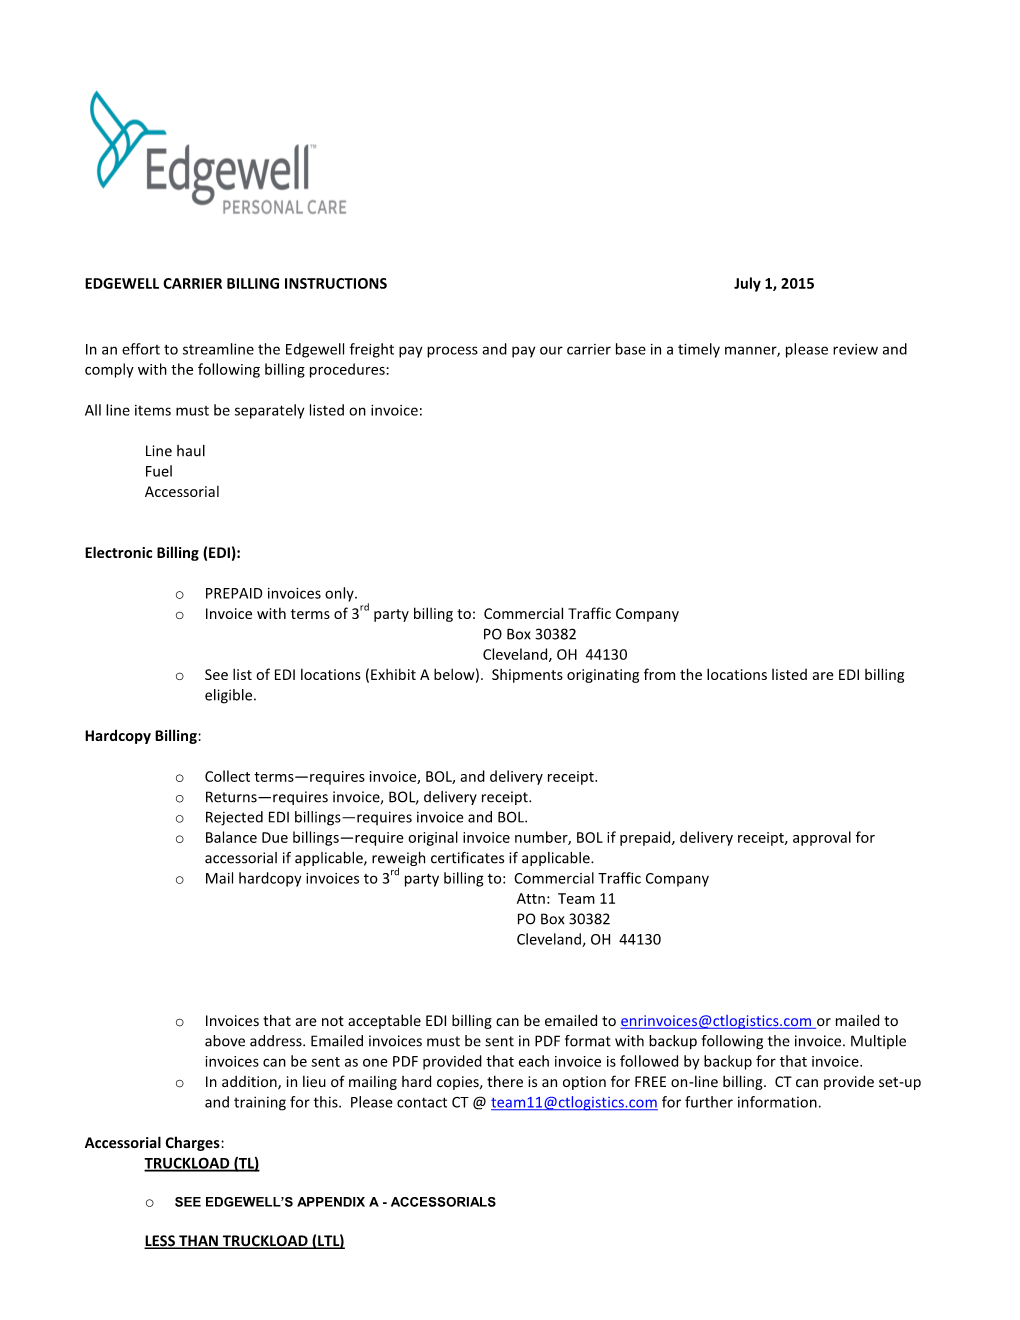 EDGEWELL CARRIER BILLING INSTRUCTIONS July 1, 2015